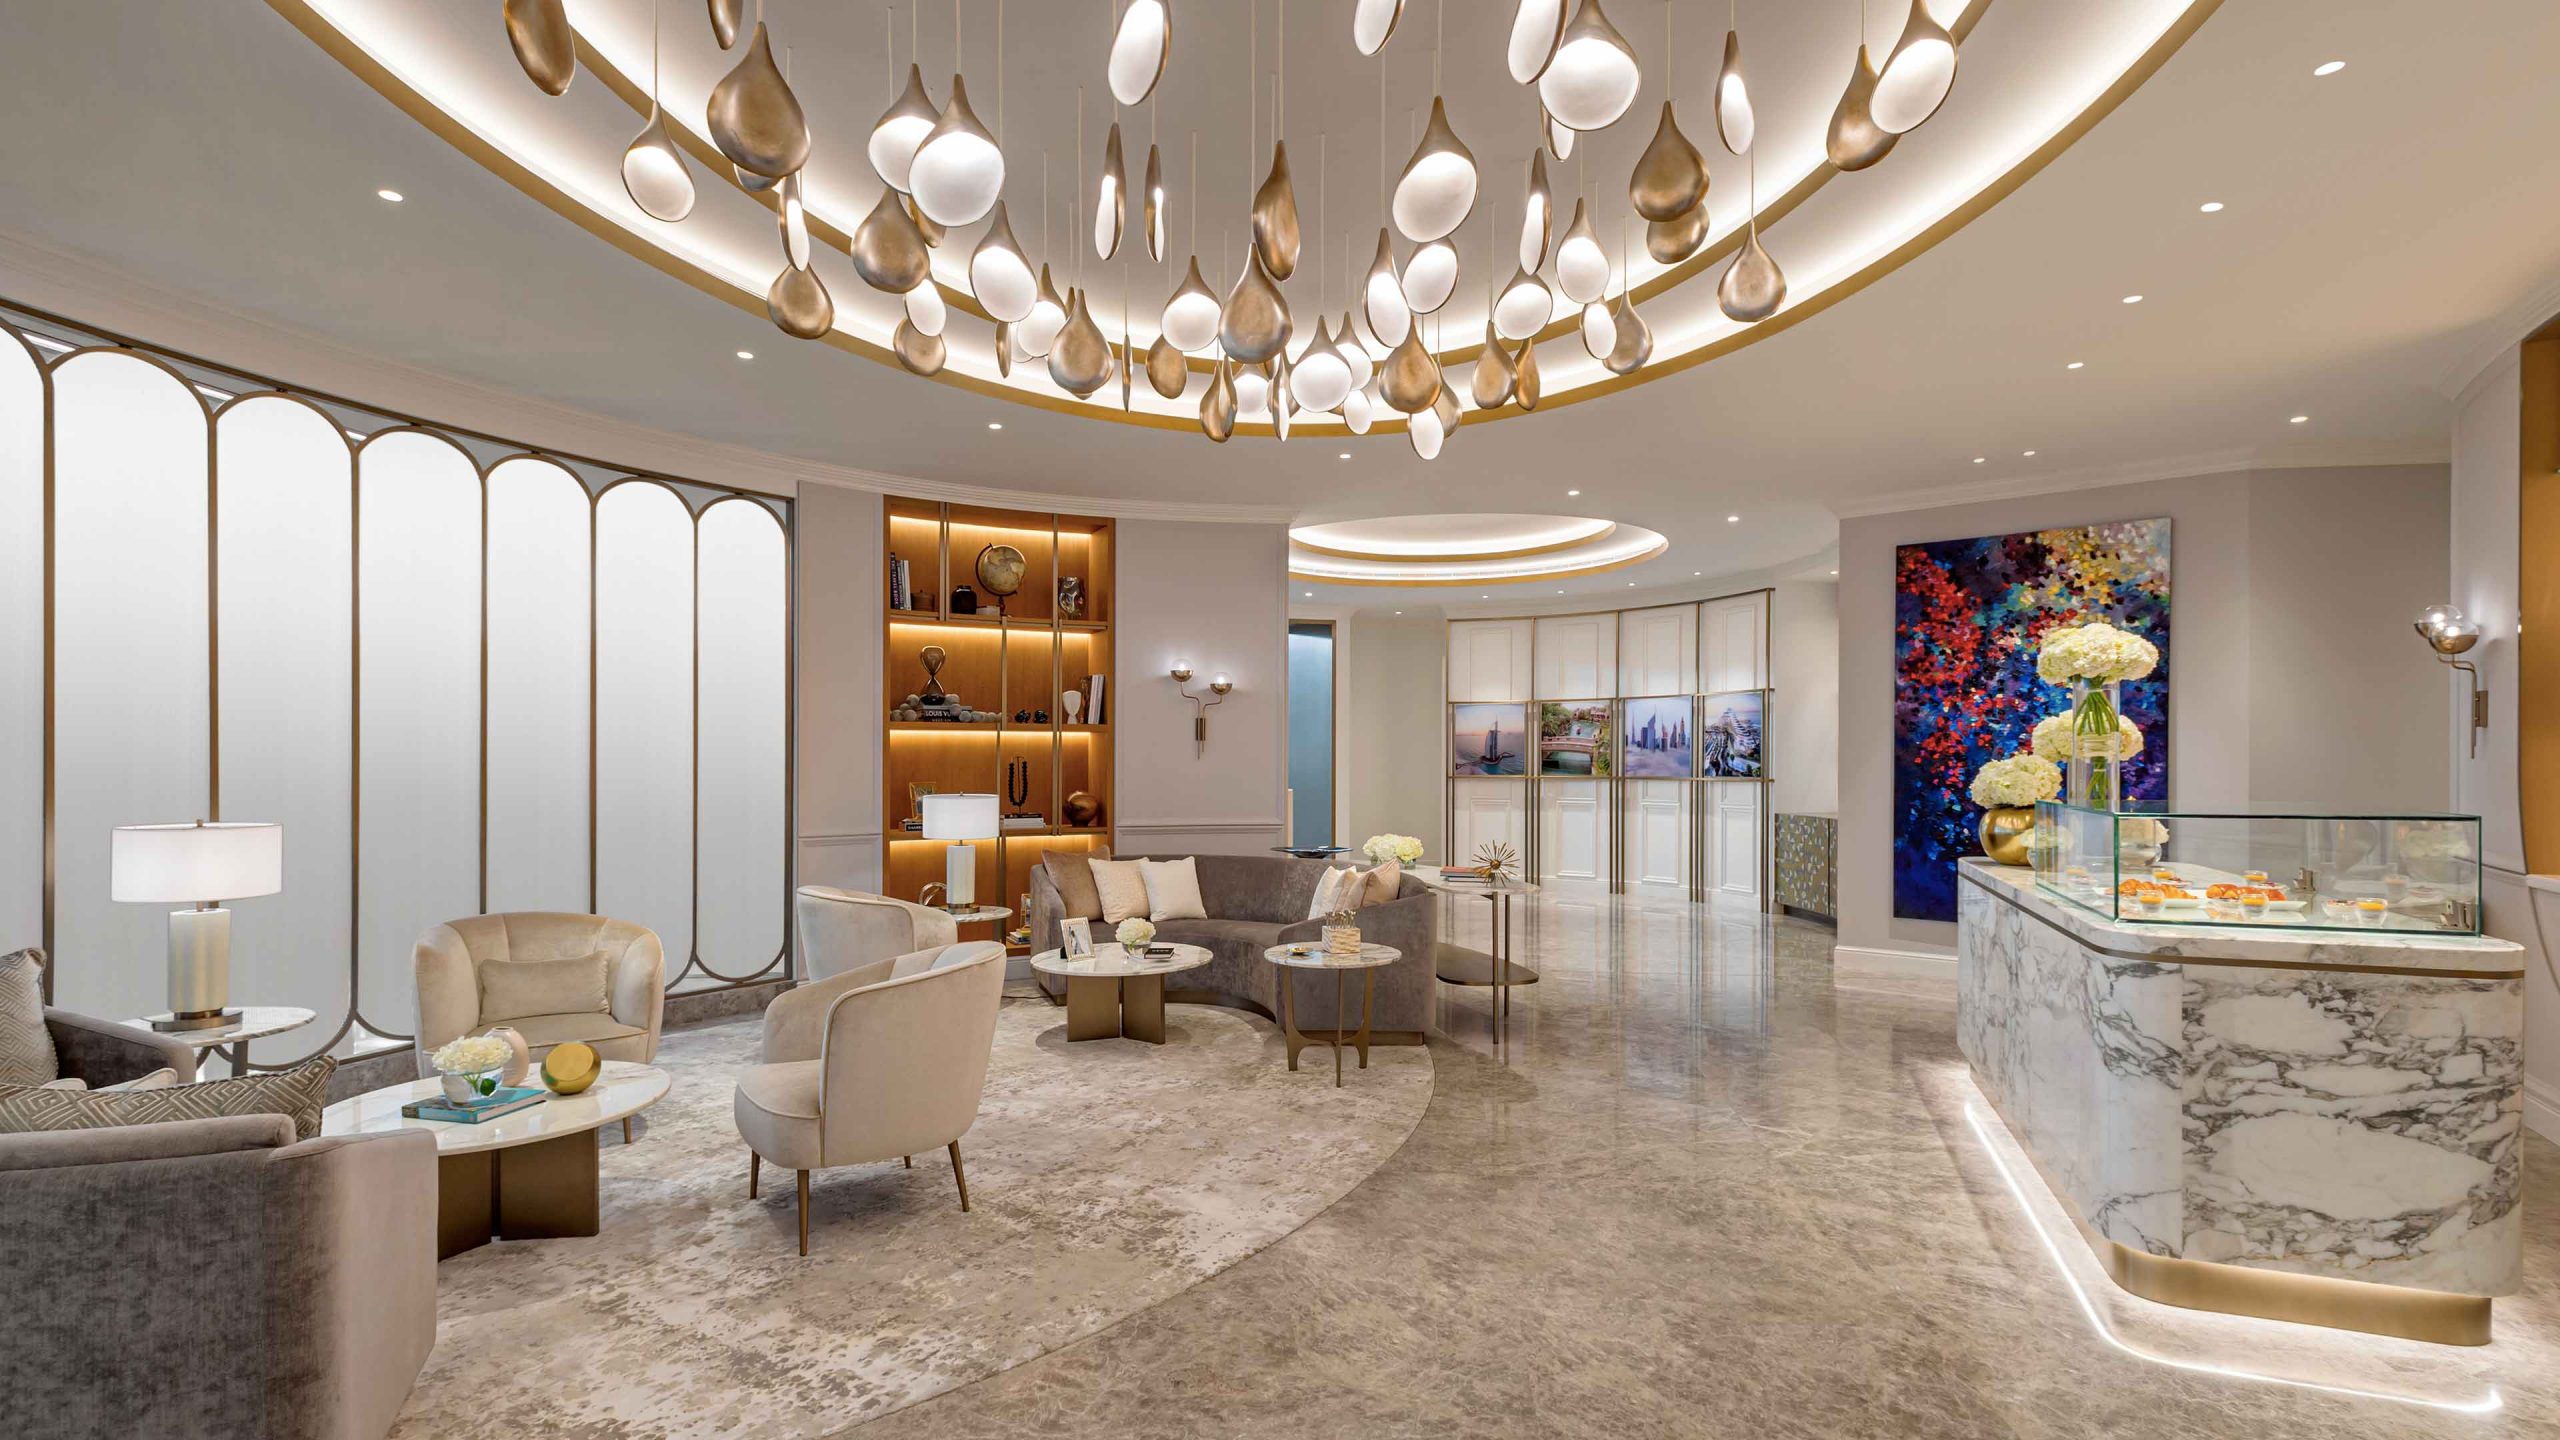 T3 Airport Lounge Luxury Hospitality Interior Illuminated Double Ceiling Cove Oggetti Chandelier Architectural Lighting Designers Studio N Dubai